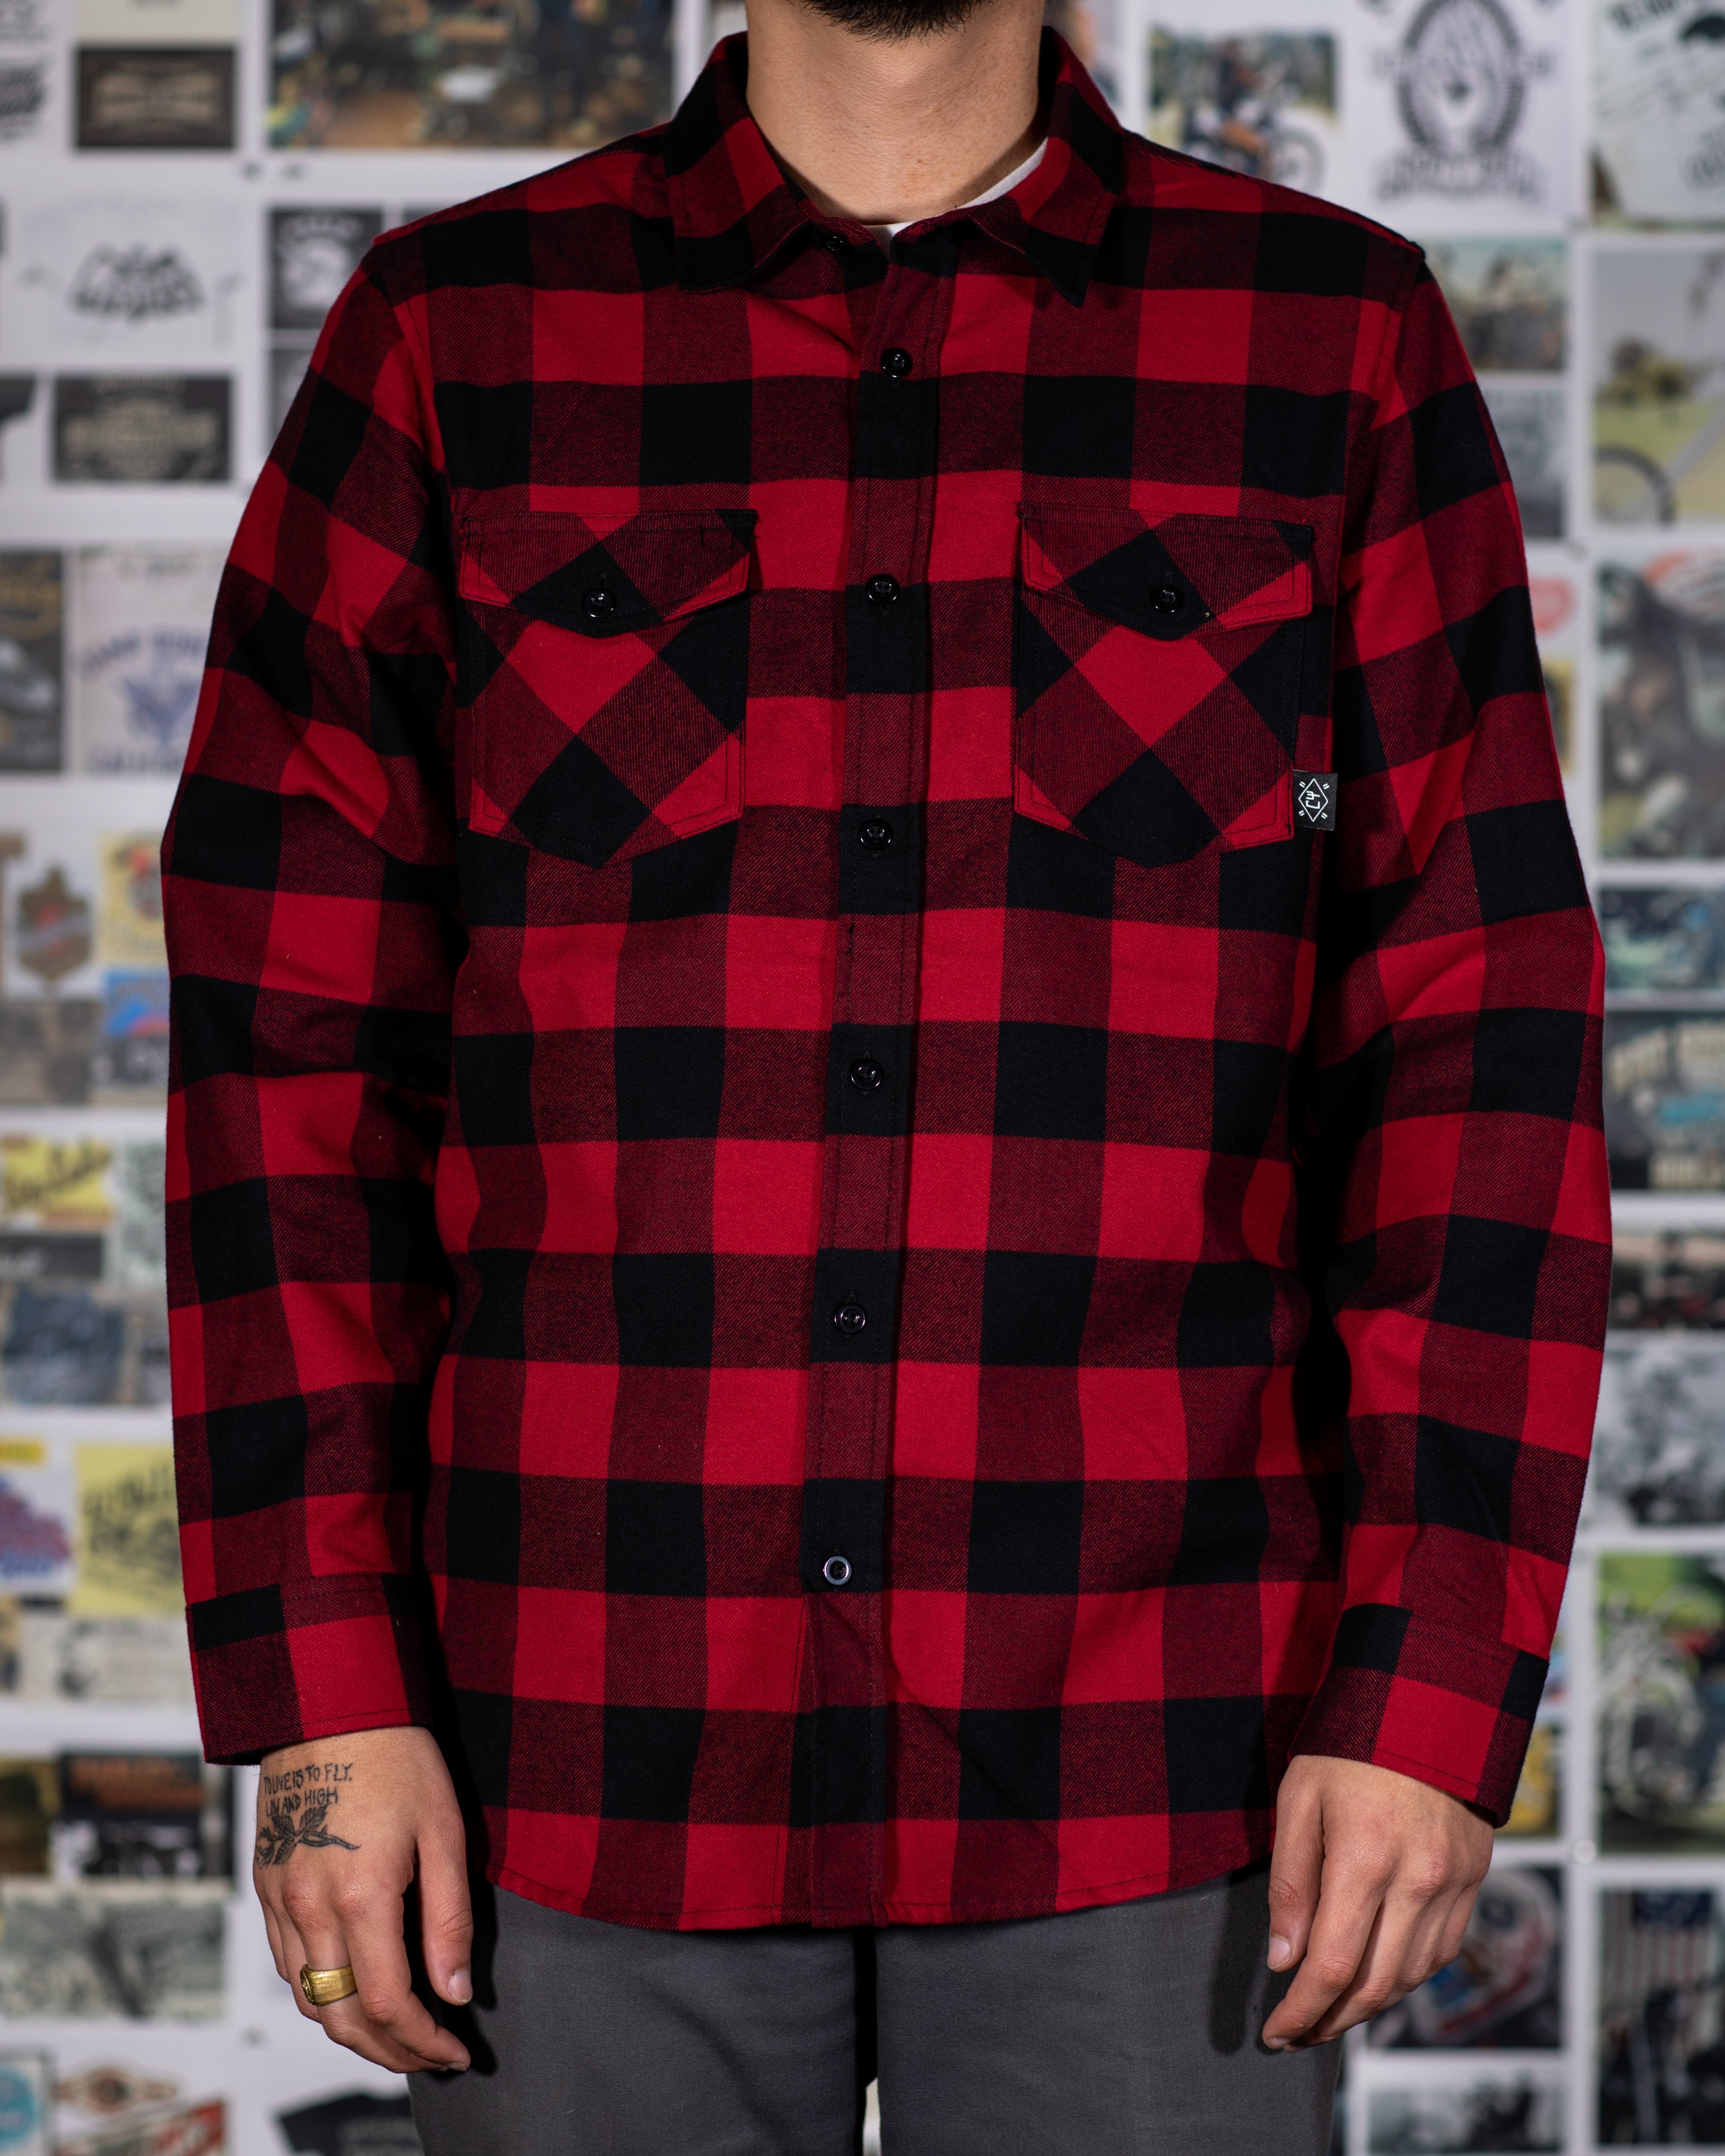 HIGHWAY FLANNEL - commonyouthbrand